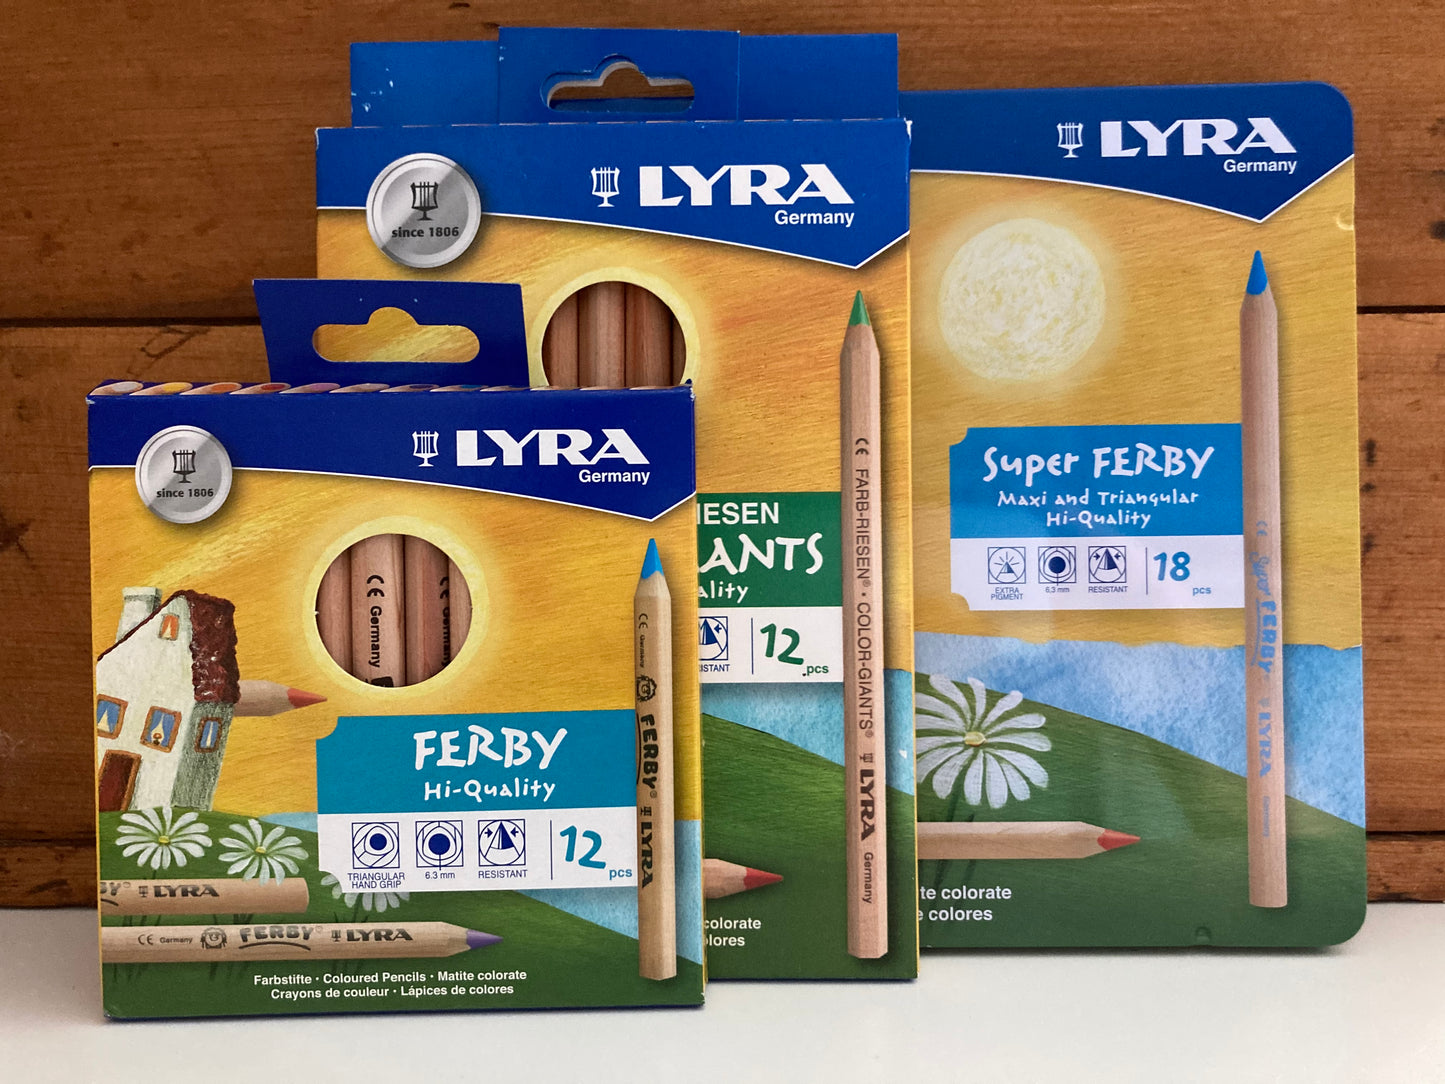 Colouring pencils, Art - 5 INCH LYRA FERBY in 12 COLOURS